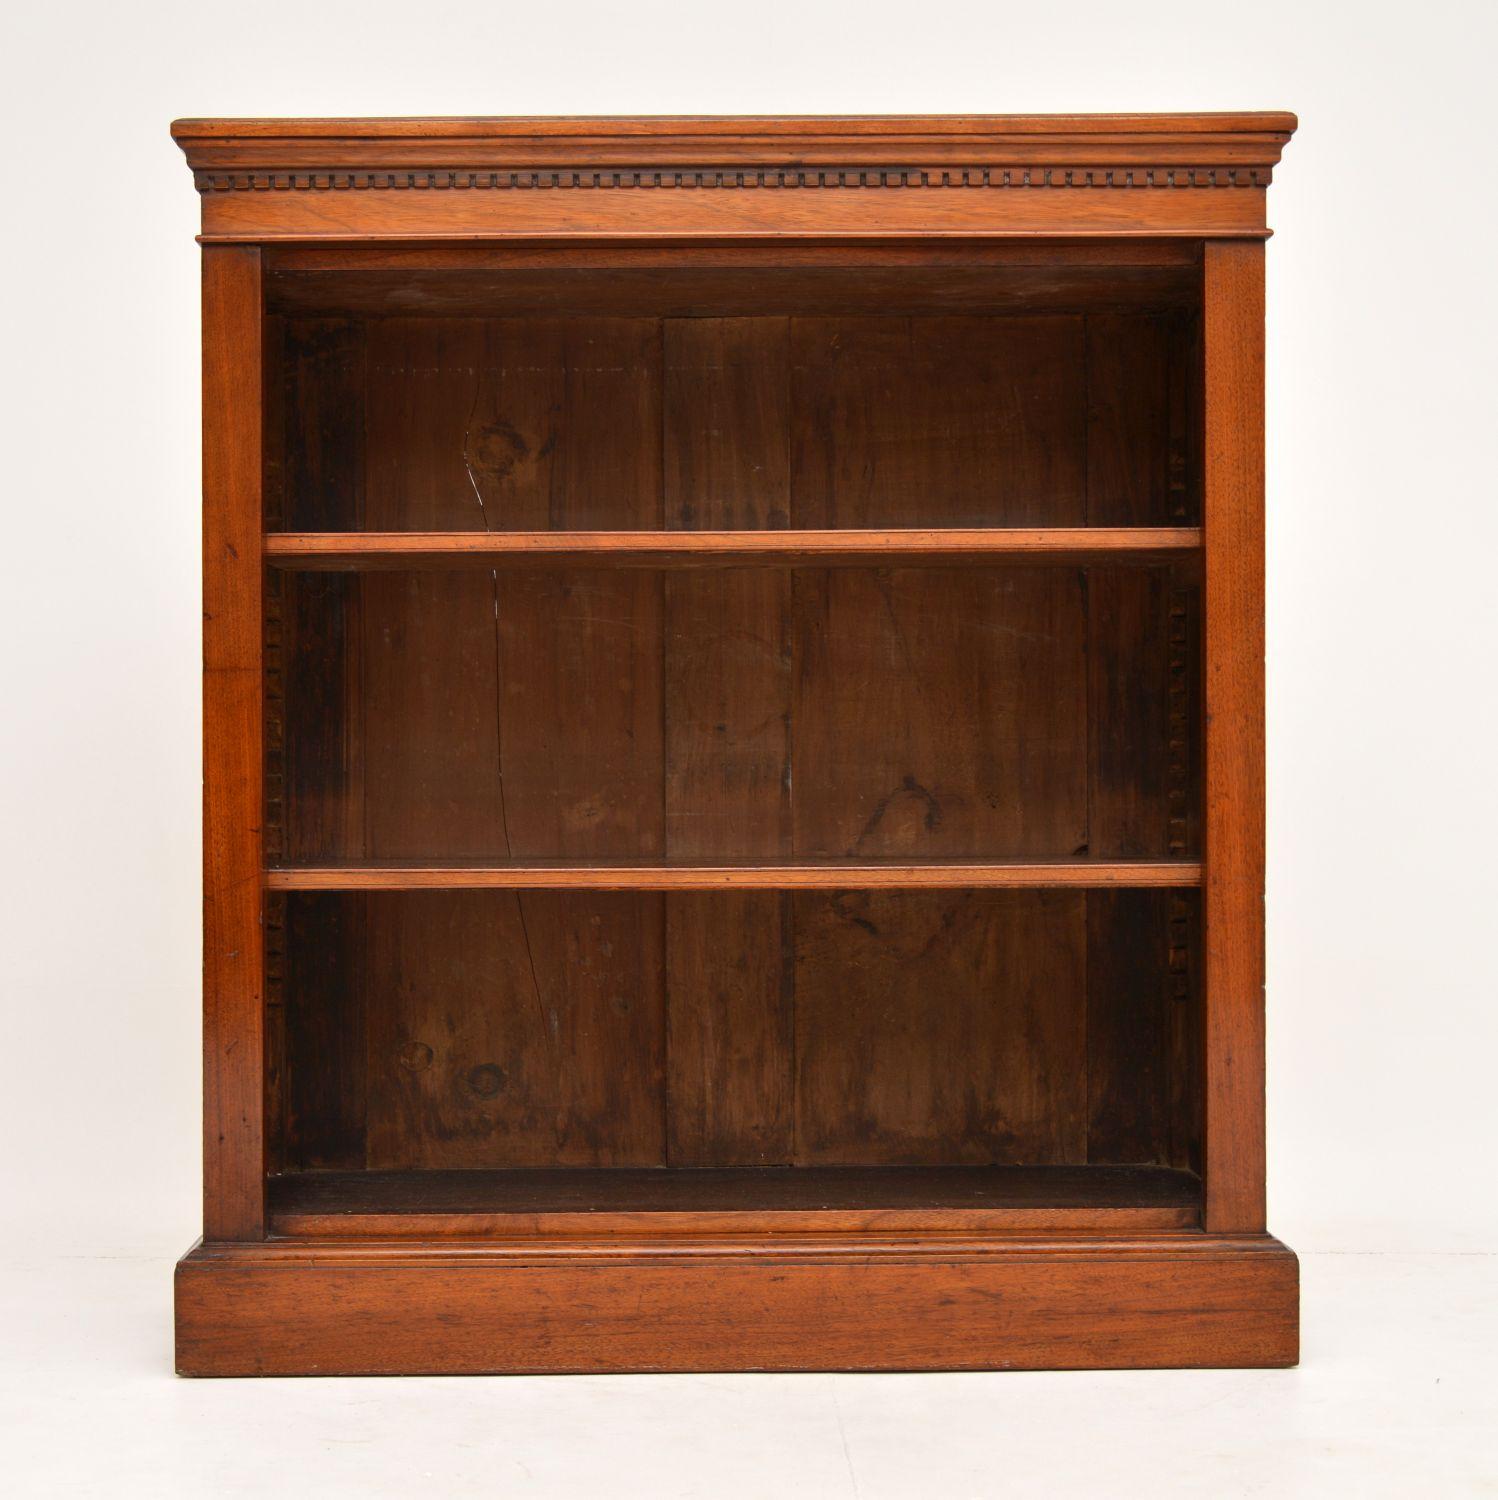 This antique Victorian mahogany bookcase is in excellent original condition and has loads of character.

It has dental mouldings around the top, adjustable shelves on sharks teeth supports and sits on a plinth base.

It has a lovely warm color